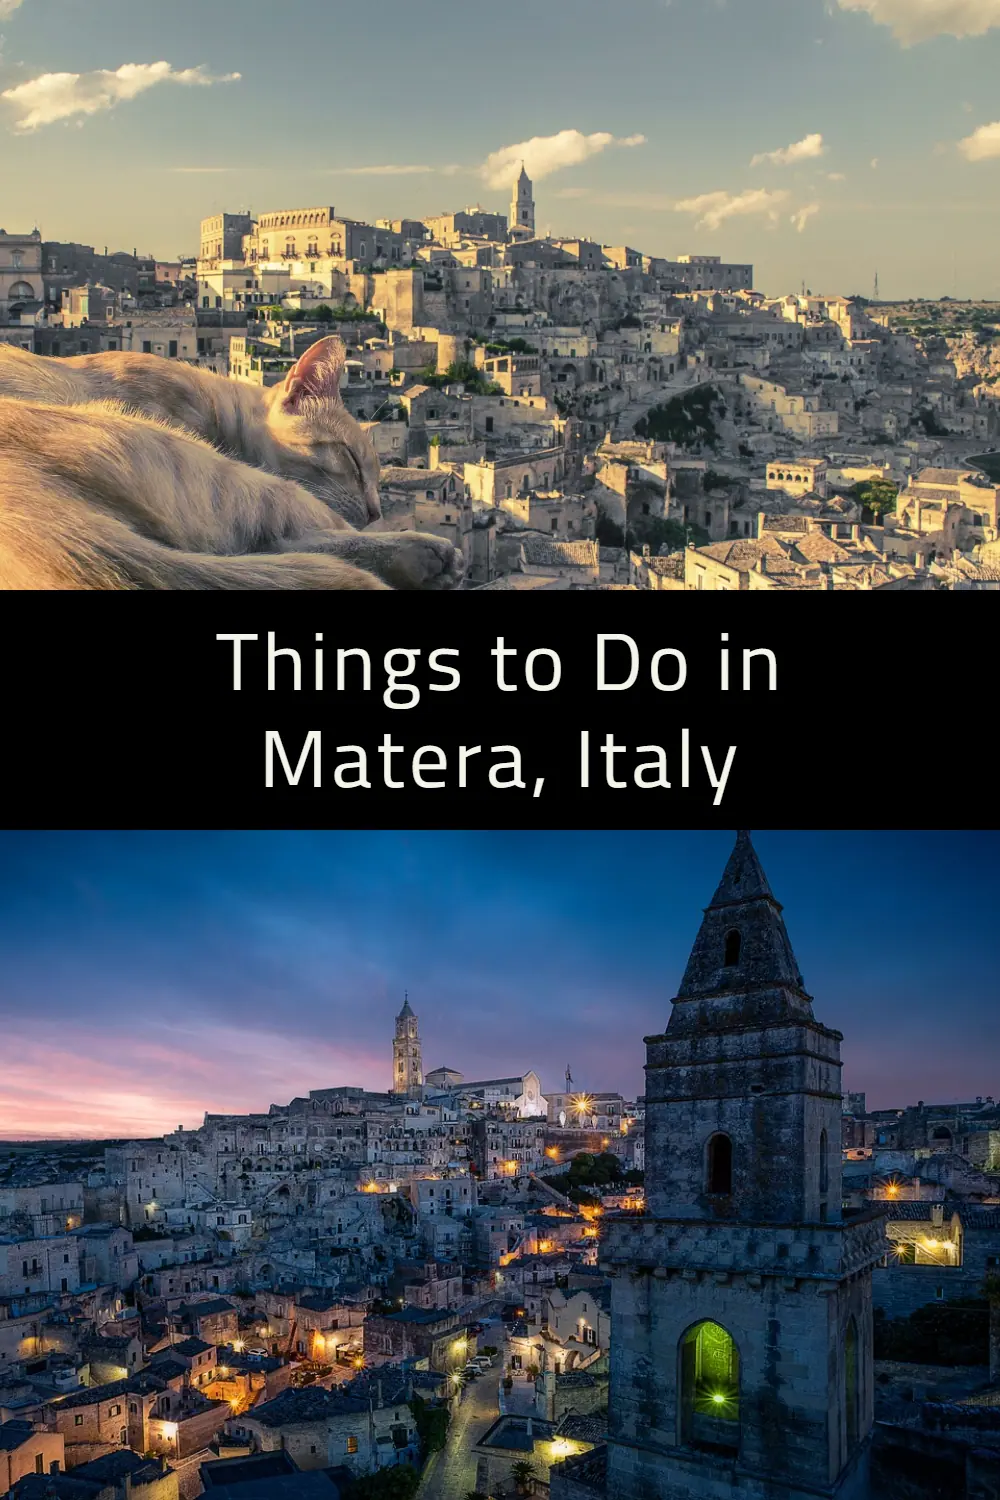 Did you know that in the 1950s, the government evacuated the sassi (cave dwellings) of Matera due to hazardous living conditions? Fast-forward to the present day, Matera is now a breathtaking UNESCO World Heritage site. Explore the journey of this controversial town and its fascinating transformation. #MateraItaly #thingstoseeinMatera